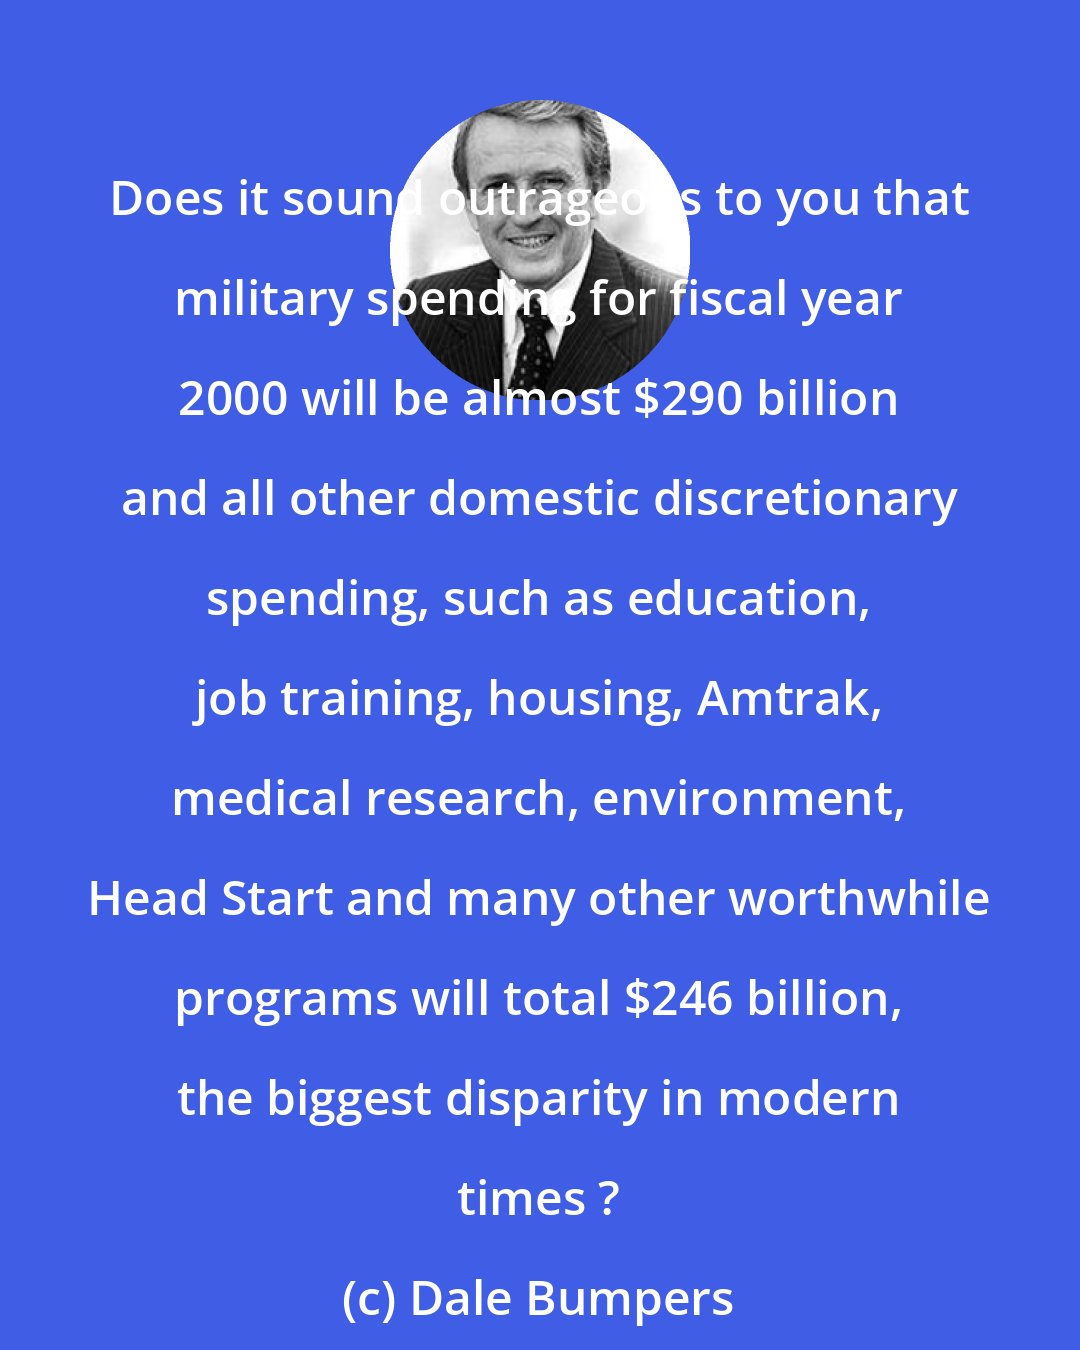 Dale Bumpers: Does it sound outrageous to you that military spending for fiscal year 2000 will be almost $290 billion and all other domestic discretionary spending, such as education, job training, housing, Amtrak, medical research, environment, Head Start and many other worthwhile programs will total $246 billion, the biggest disparity in modern times ?